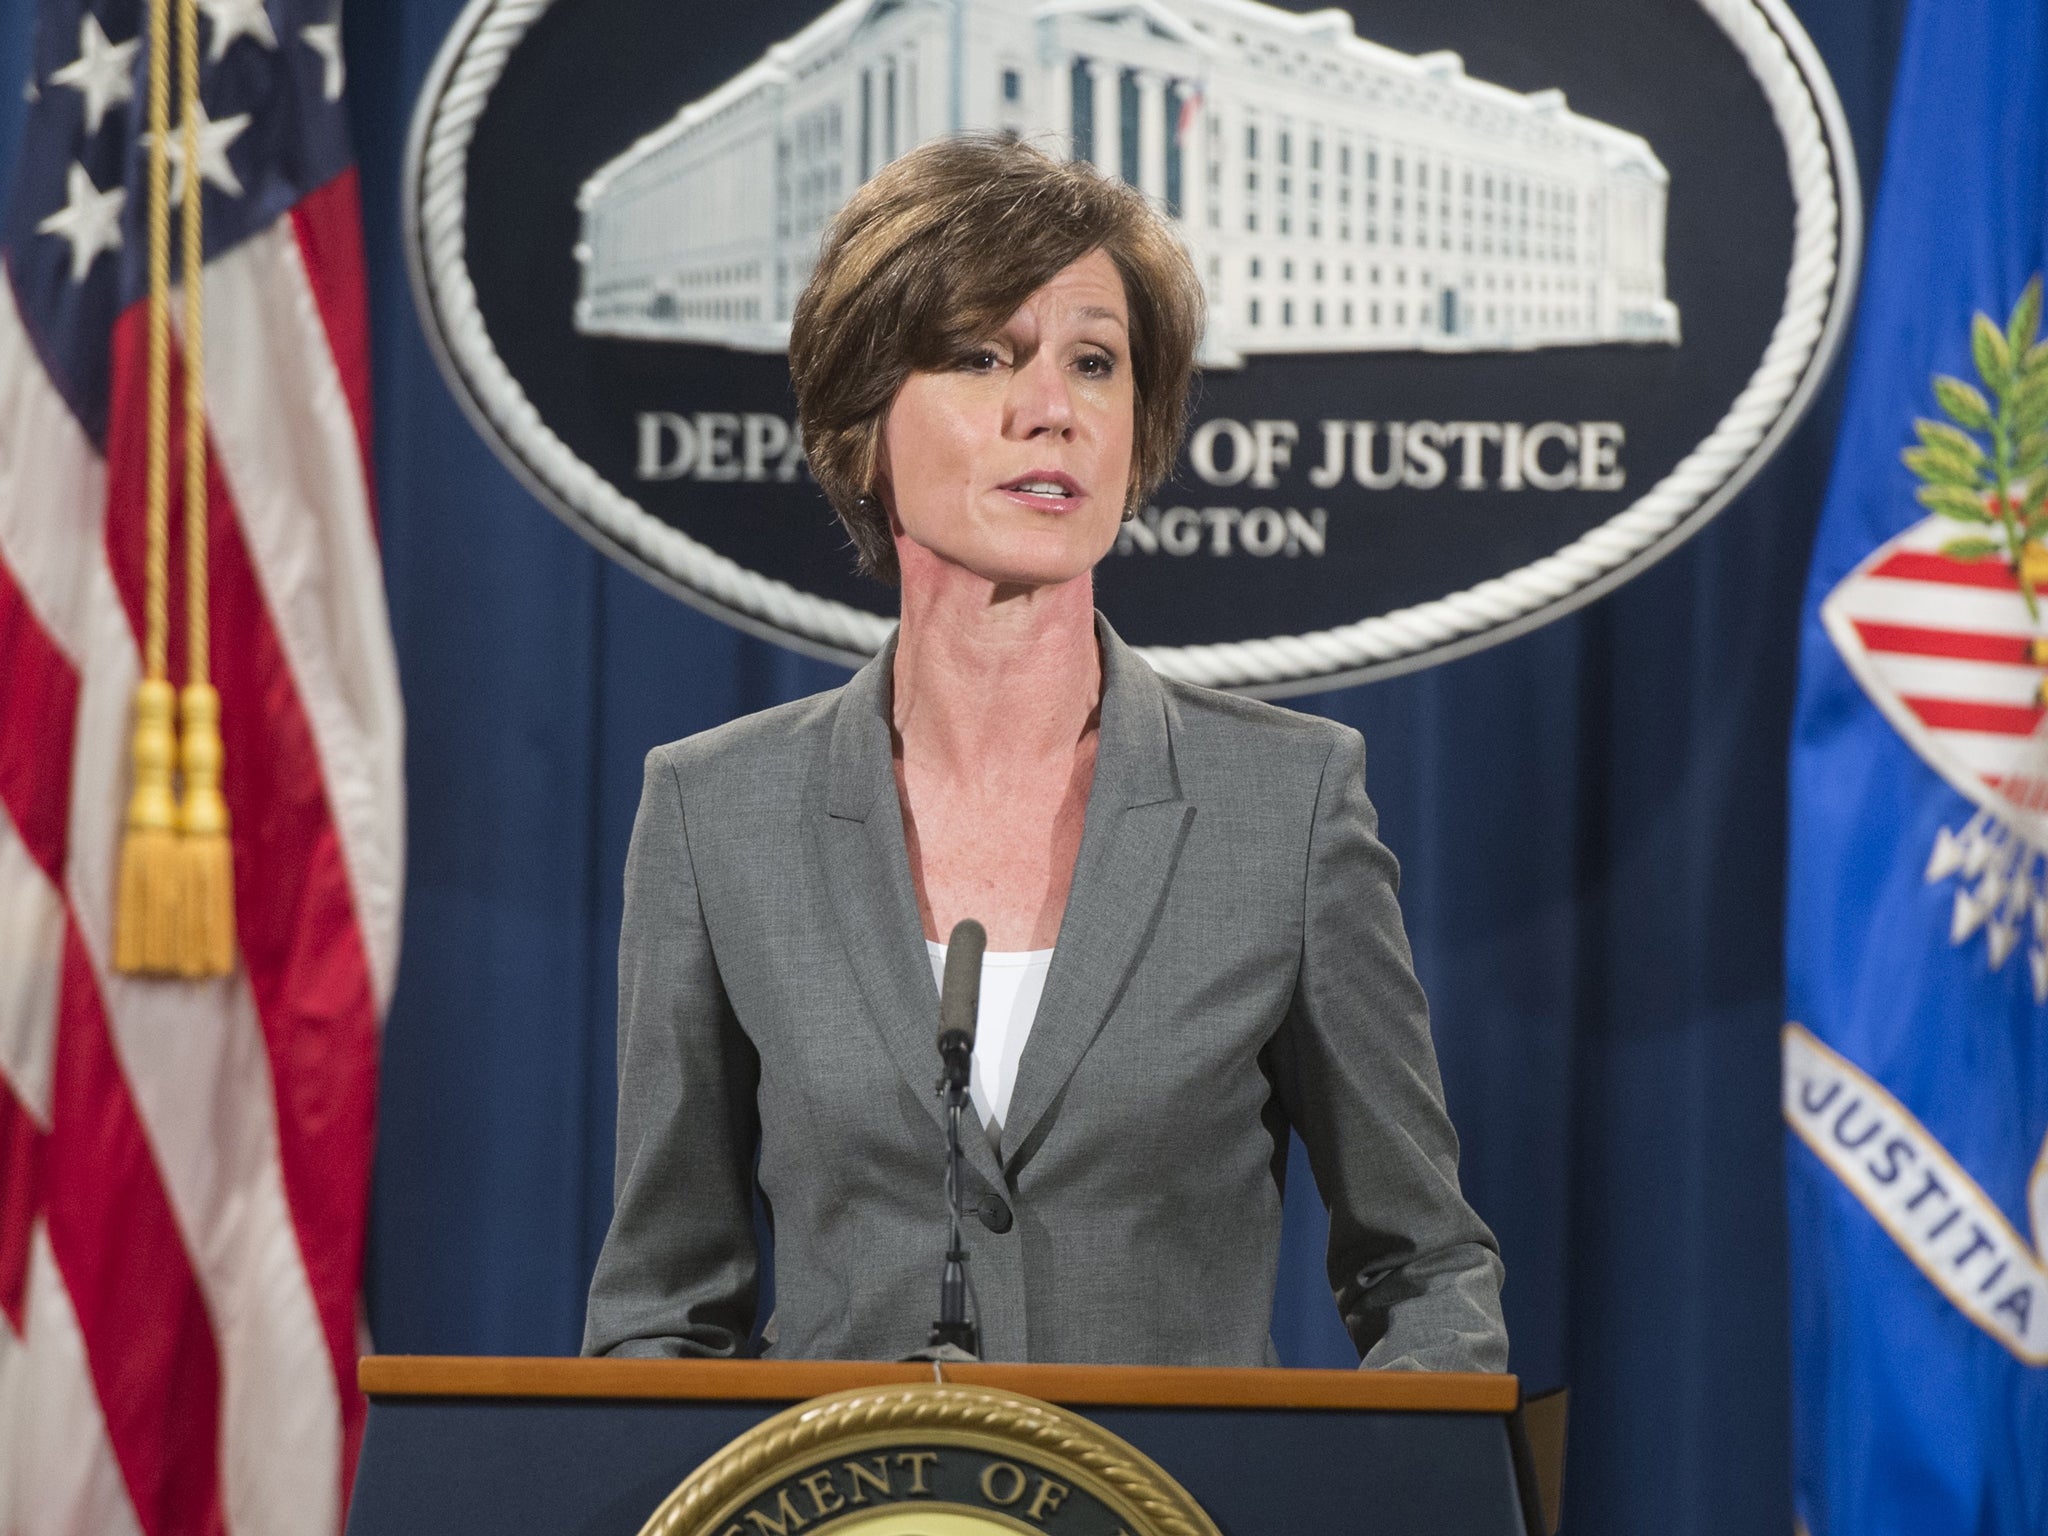 Mr Trump has fired the acting US attorney general after she told justice department lawyers not to defend his executive order banning entry for people from seven Muslim-majority countries.